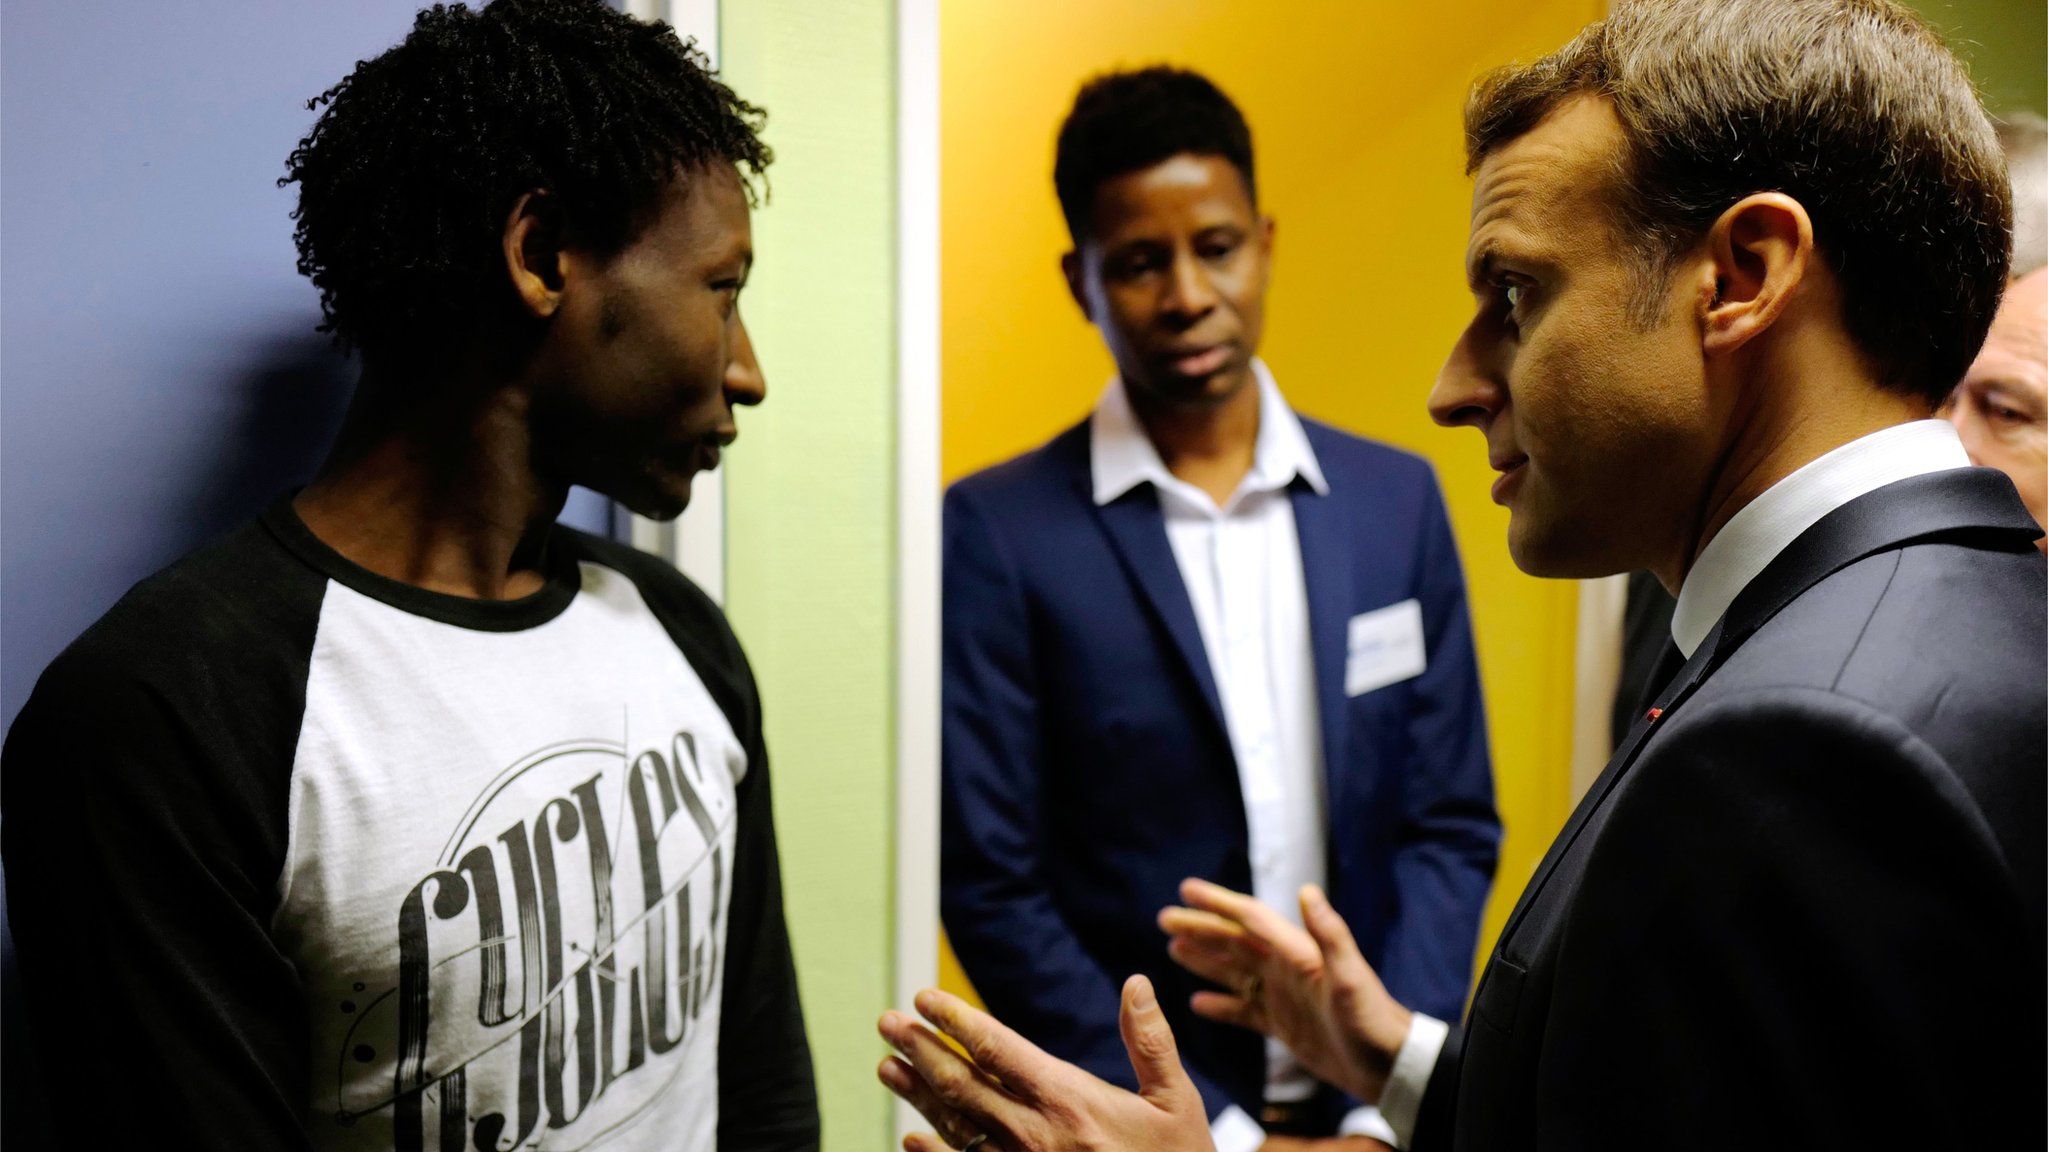 French President Emmanuel Macron speaks to a Sudanese migrant in Calais